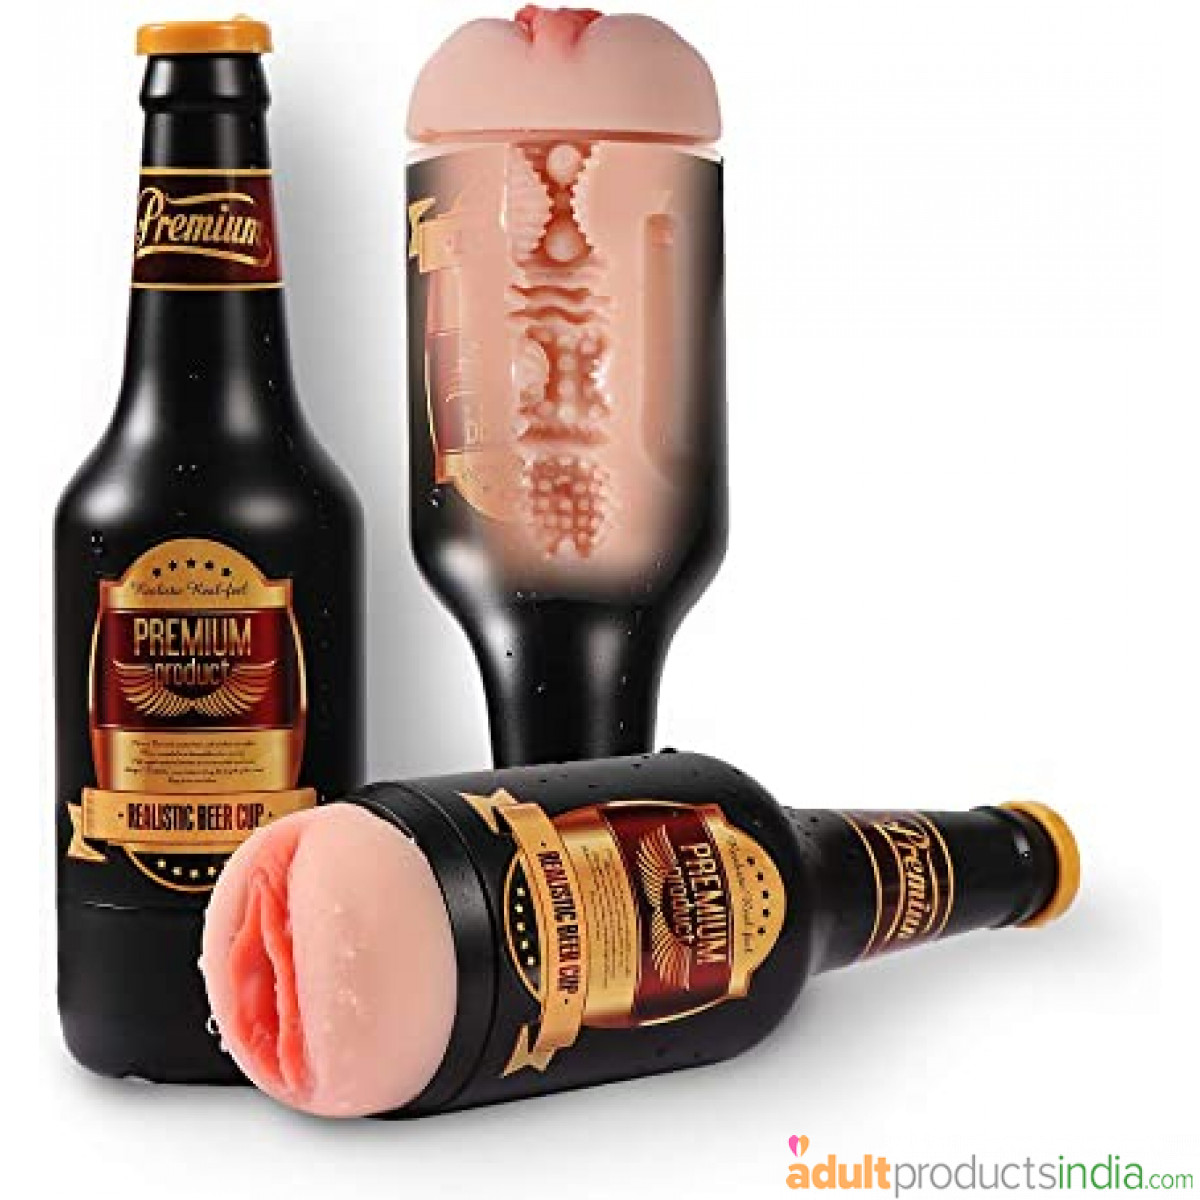 Portable Beer Bottle Male Masturbation Cup